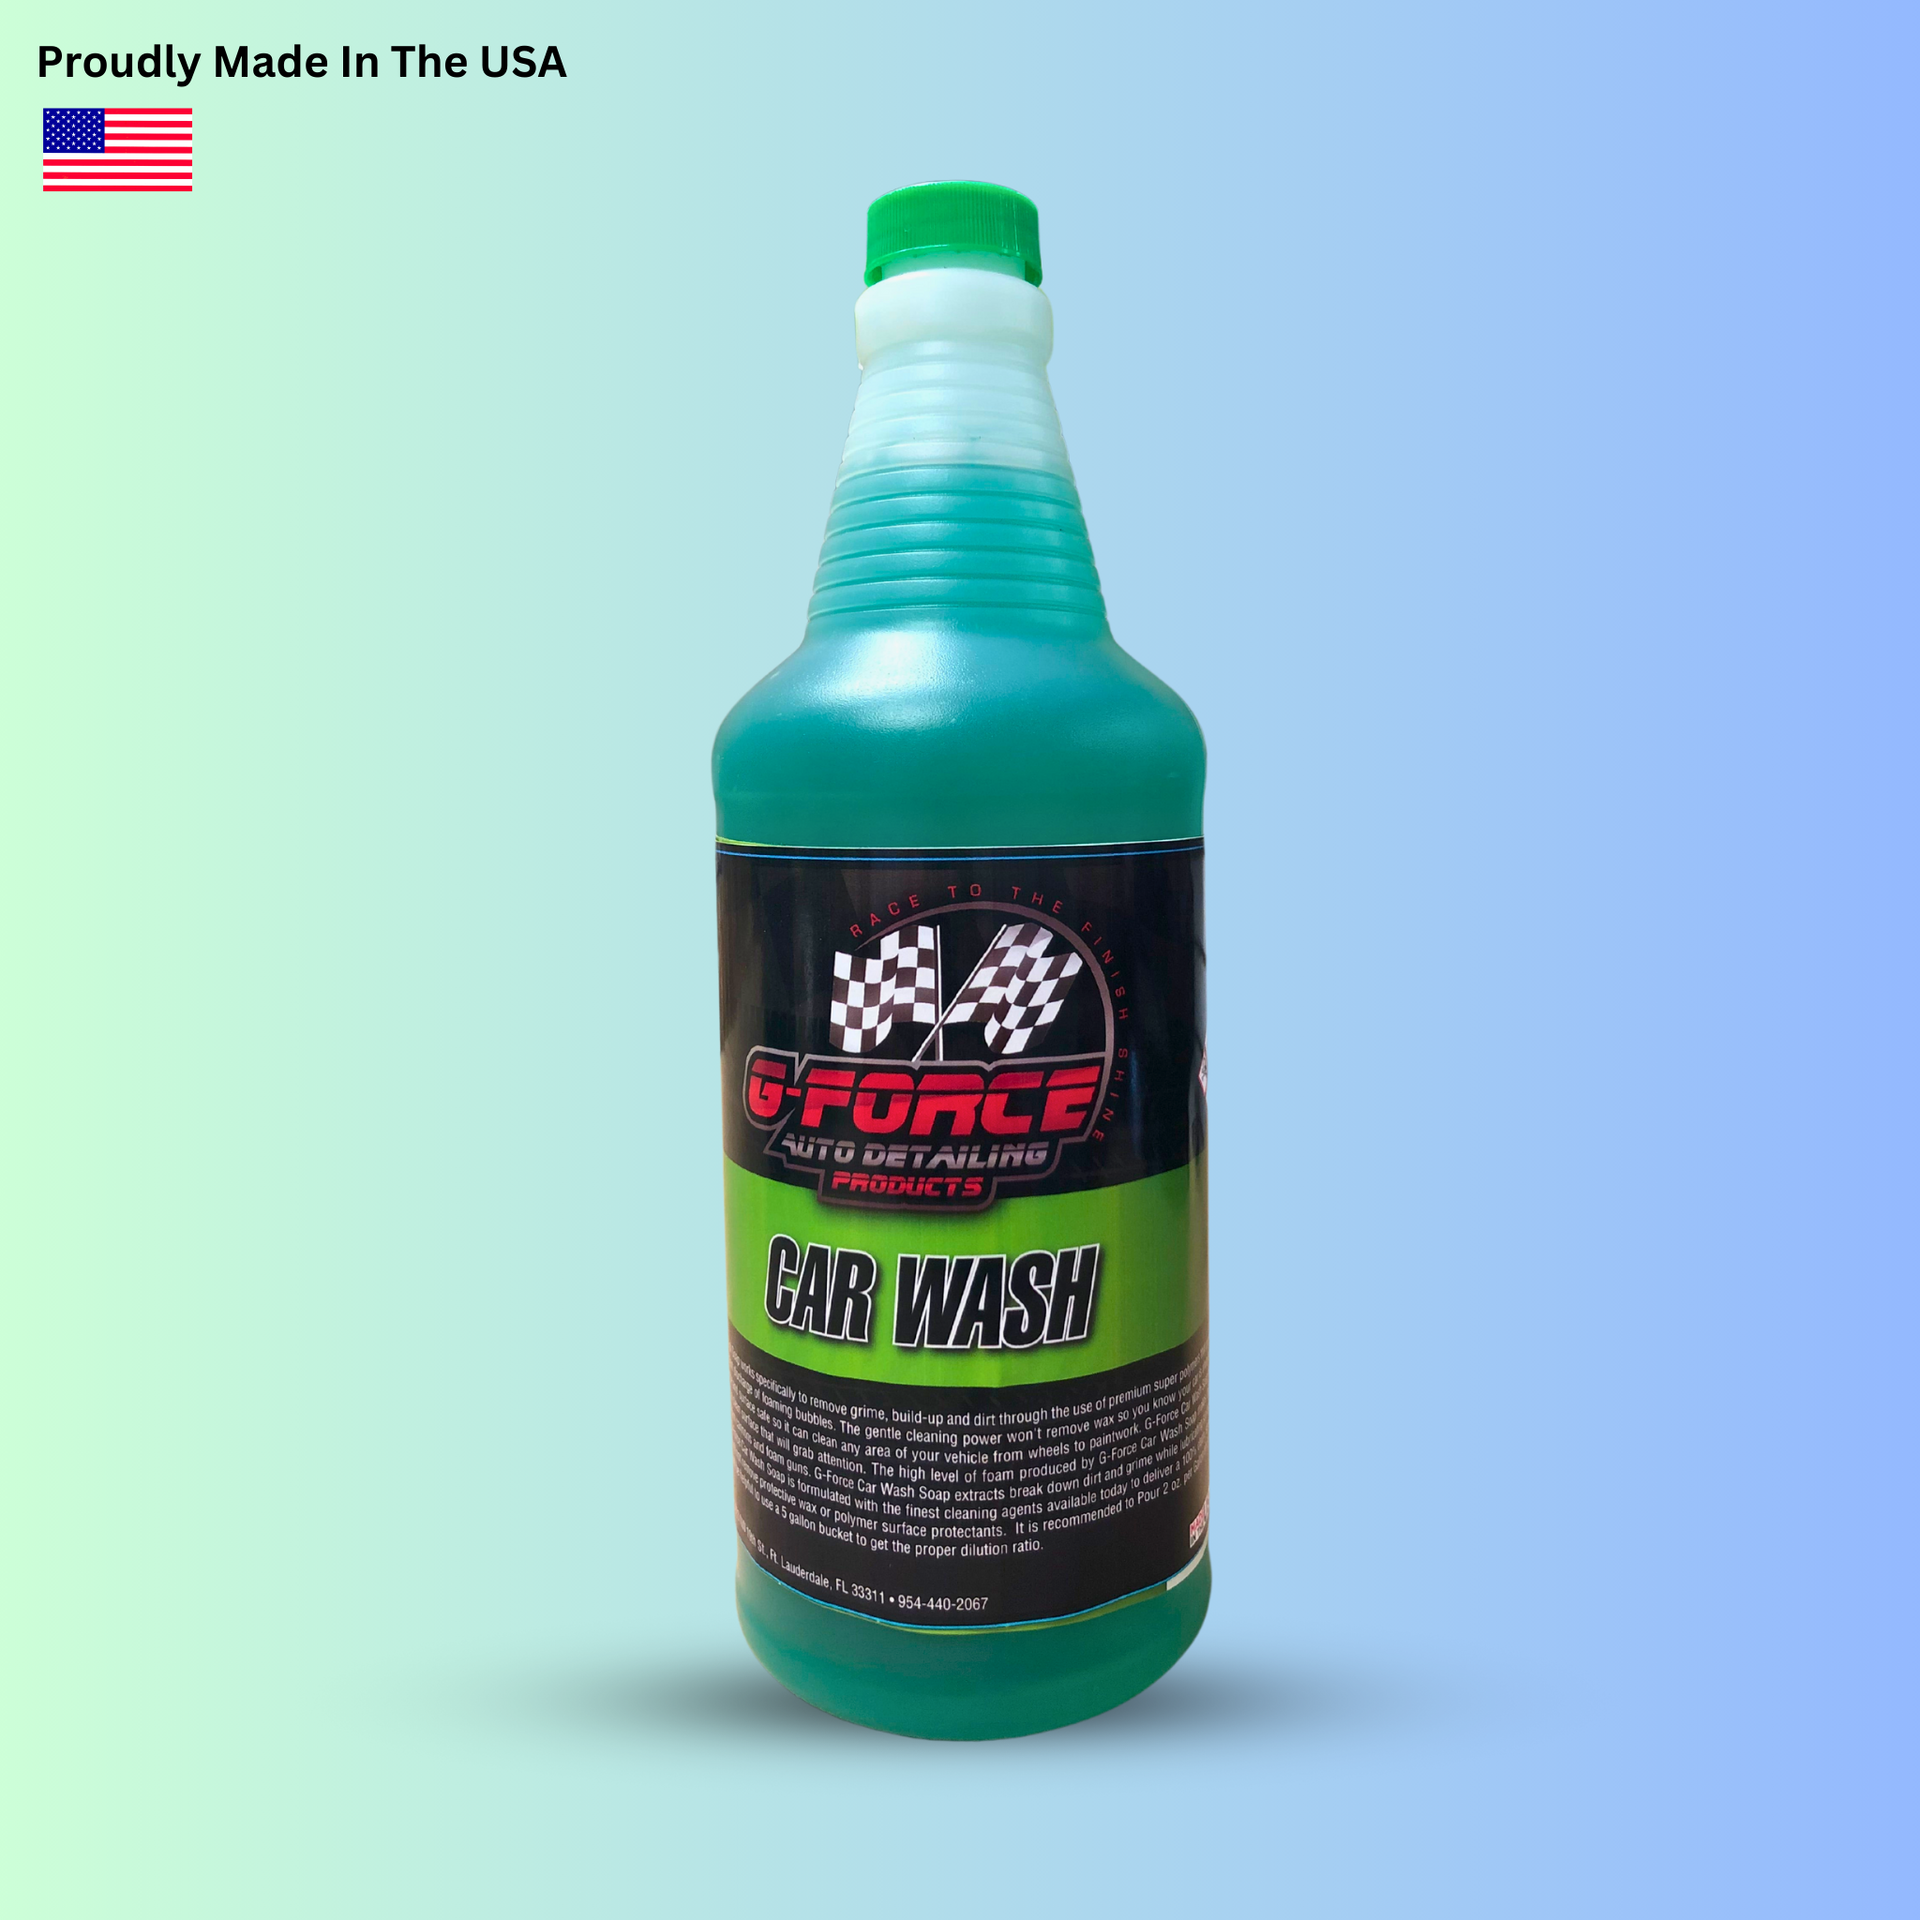 Polymer Polish Car Wash & Wax Clean Shine Car Cleaner Detergent Soap  Deep-Rich Green Color — 3E The Carwash Manufacturer - Los Angeles Car Wash  Supplies, Parts, and Equipment / Auto-Detailing Chemicals /